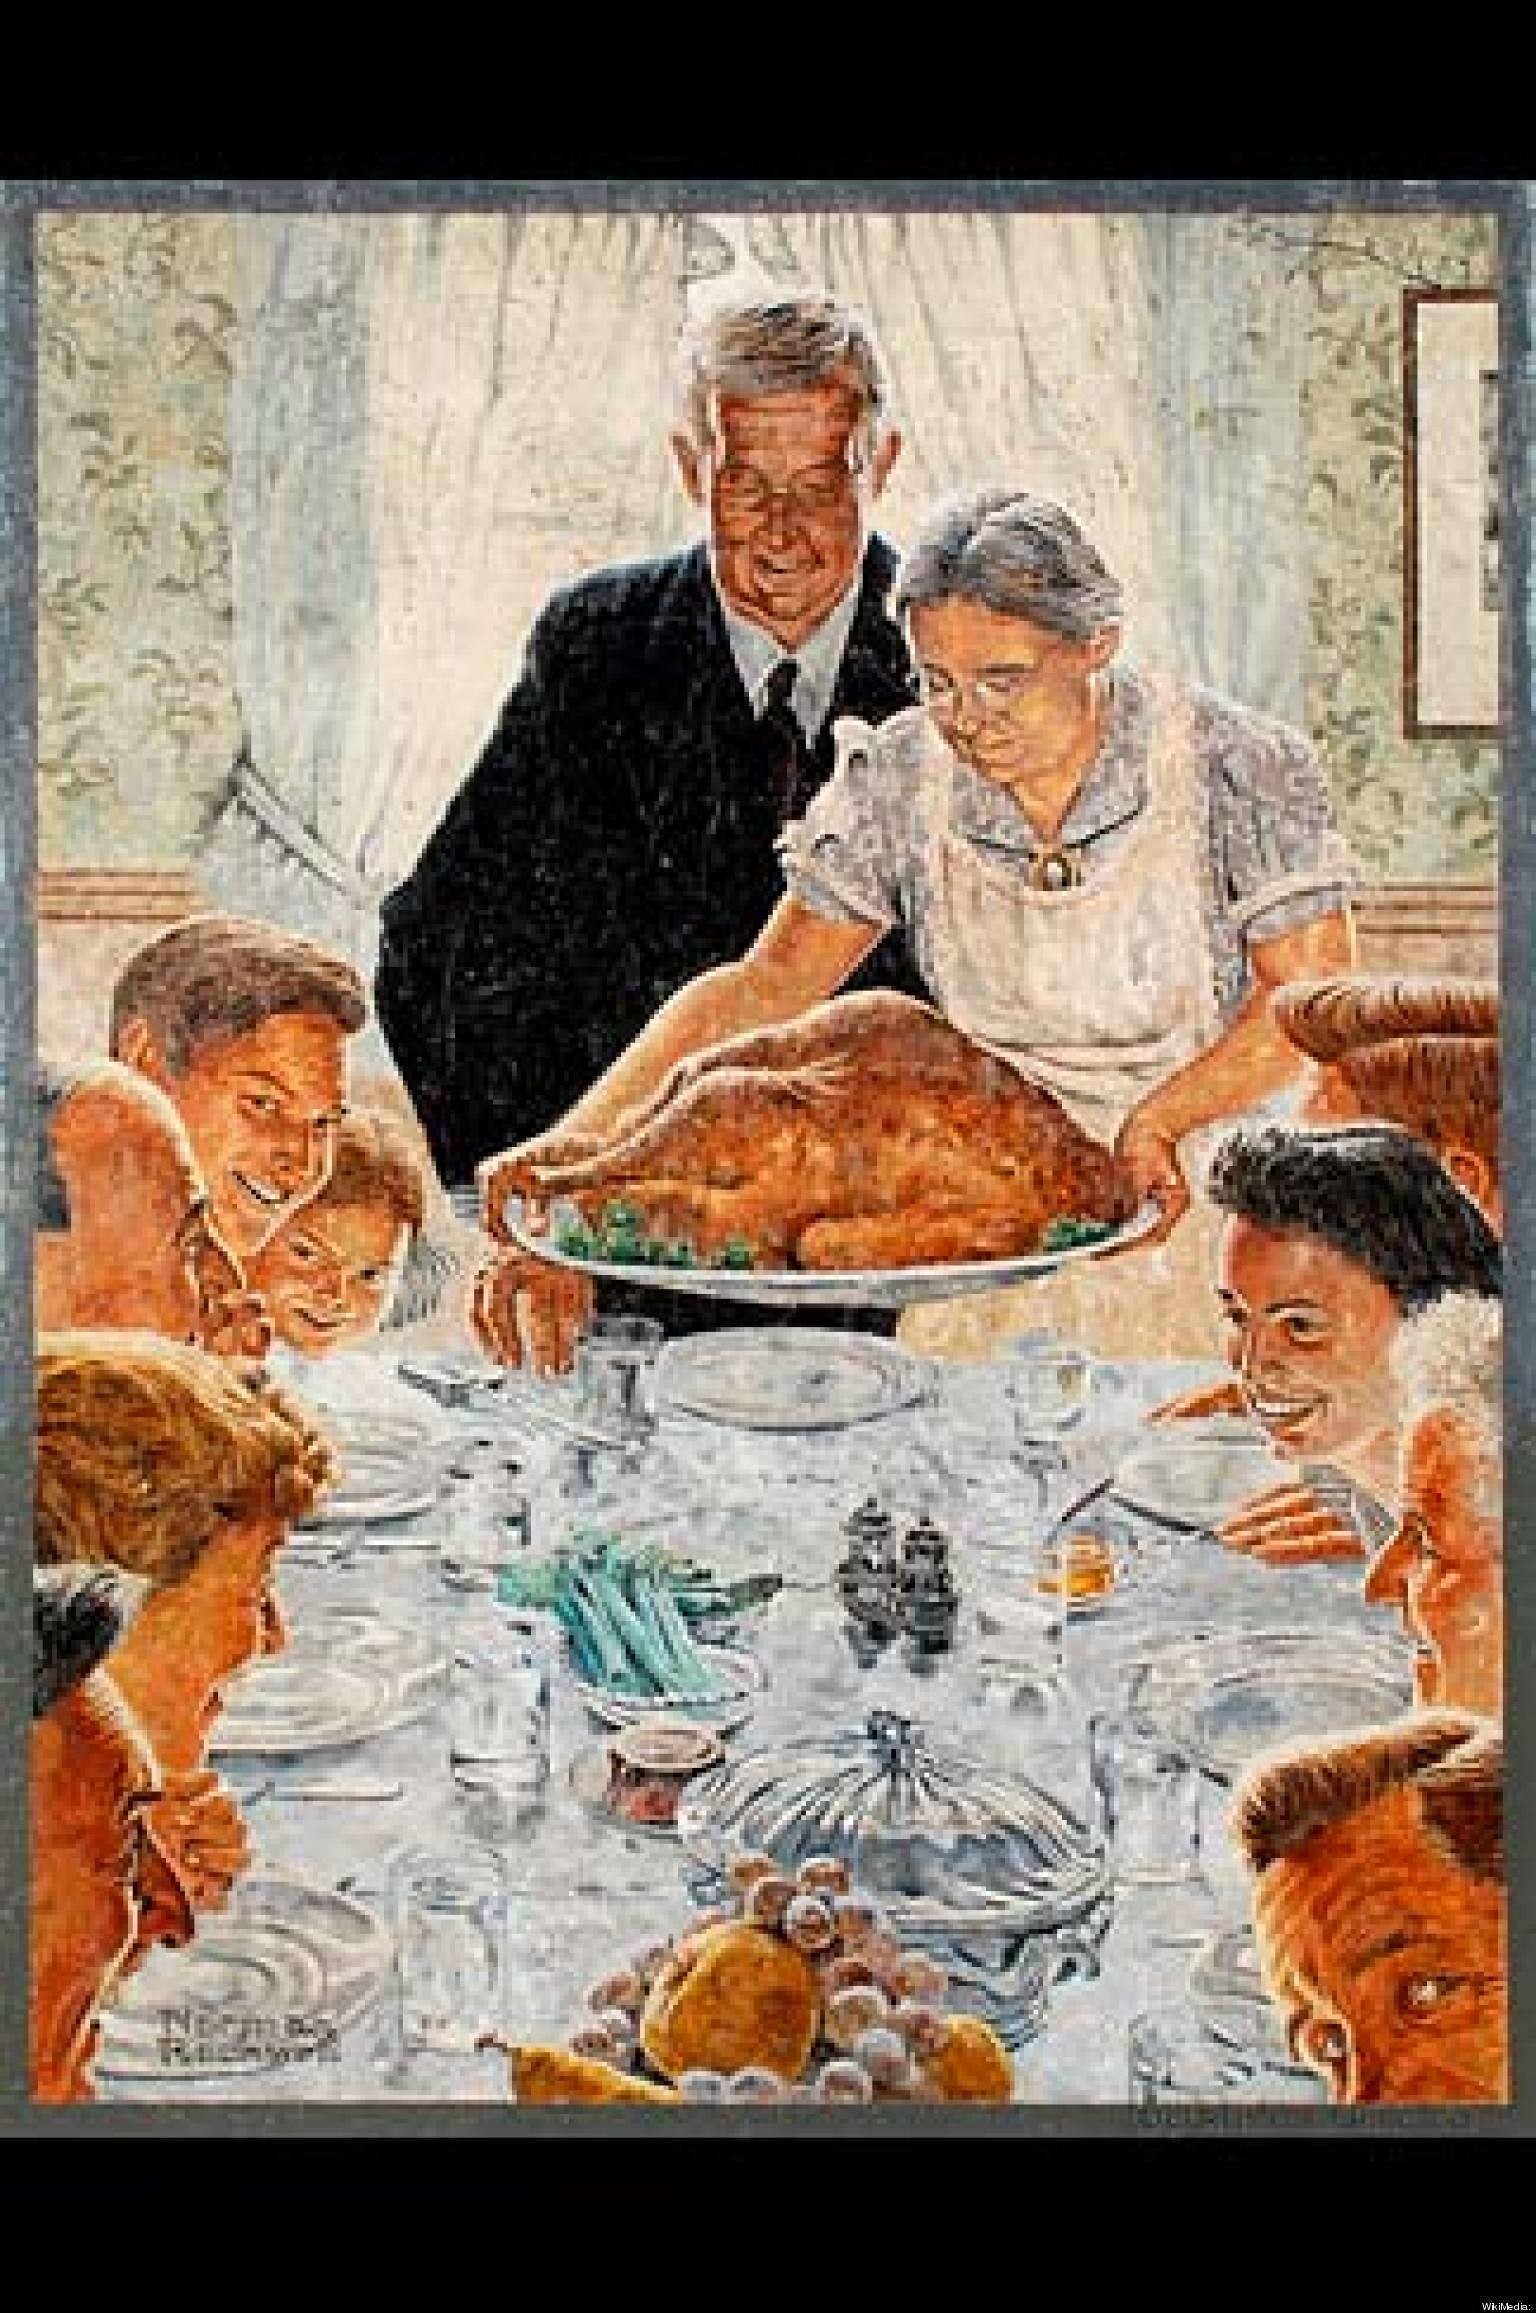 1536x2313 Norman Rockwell 0 HTML code. Thanksgiving Thoughts on Freedom and America |  Ed Crego, George MuÃ±oz .